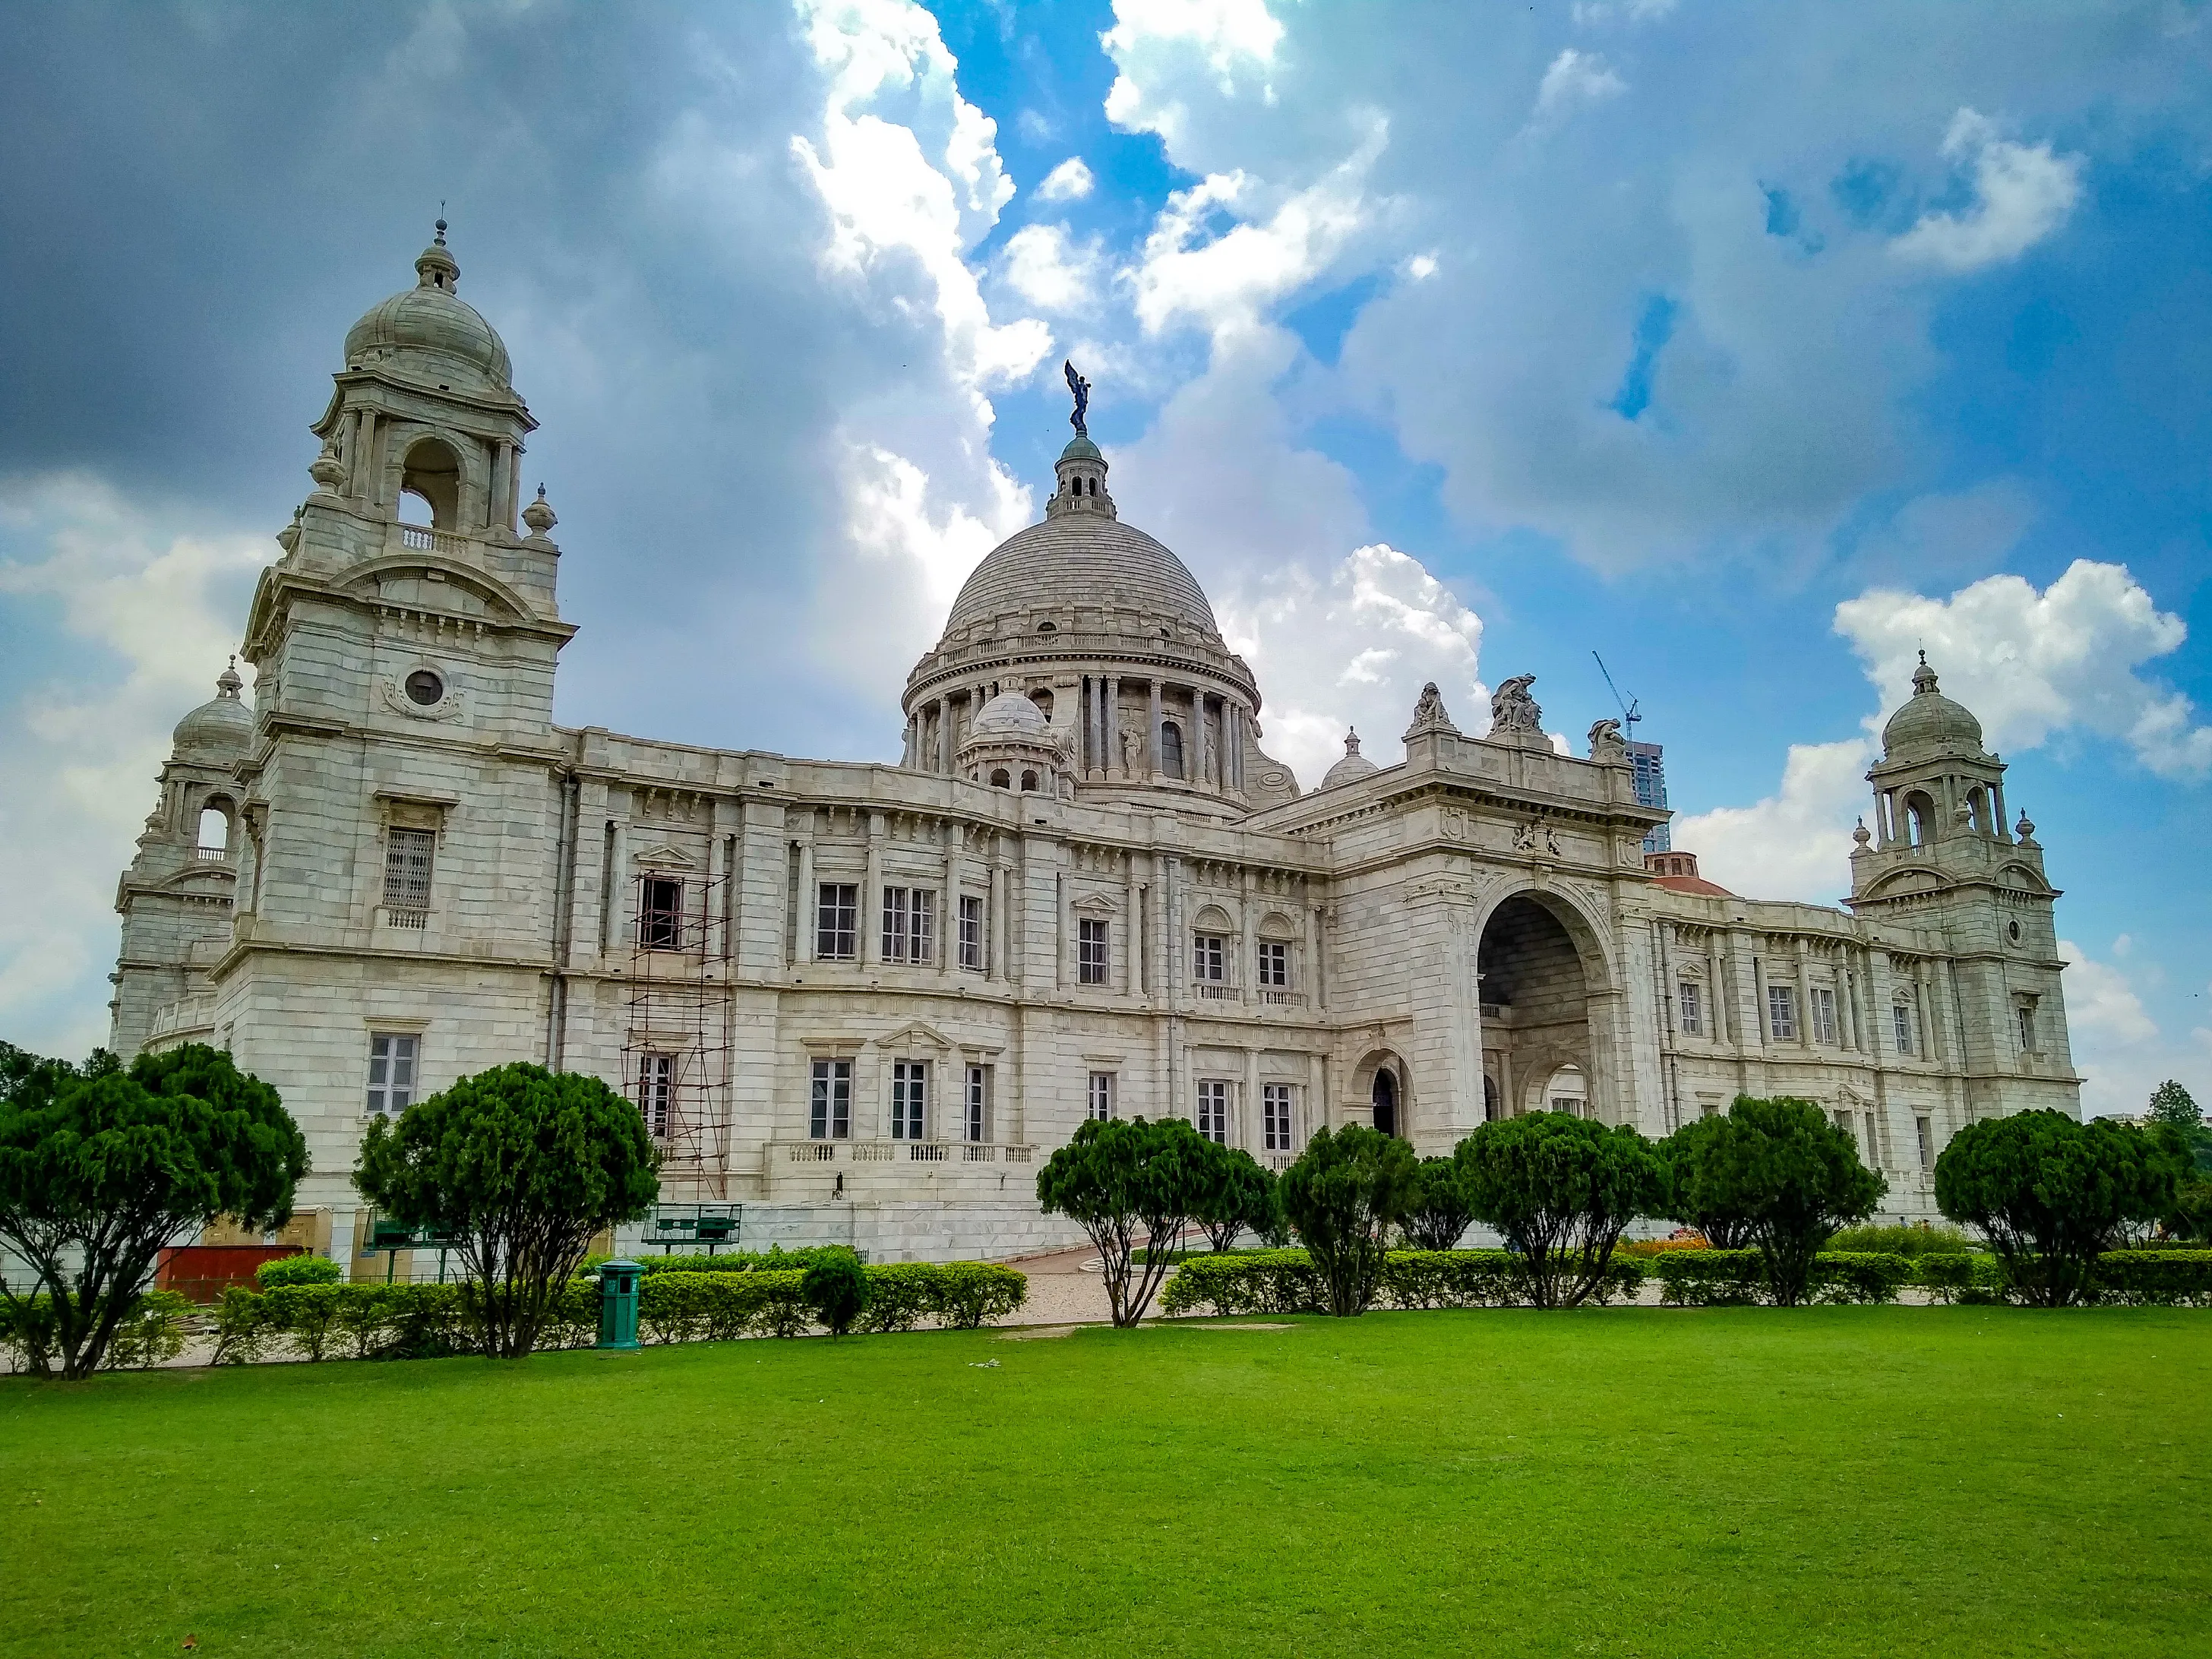 Top Things to Do in Victoria Memorial with Savaari